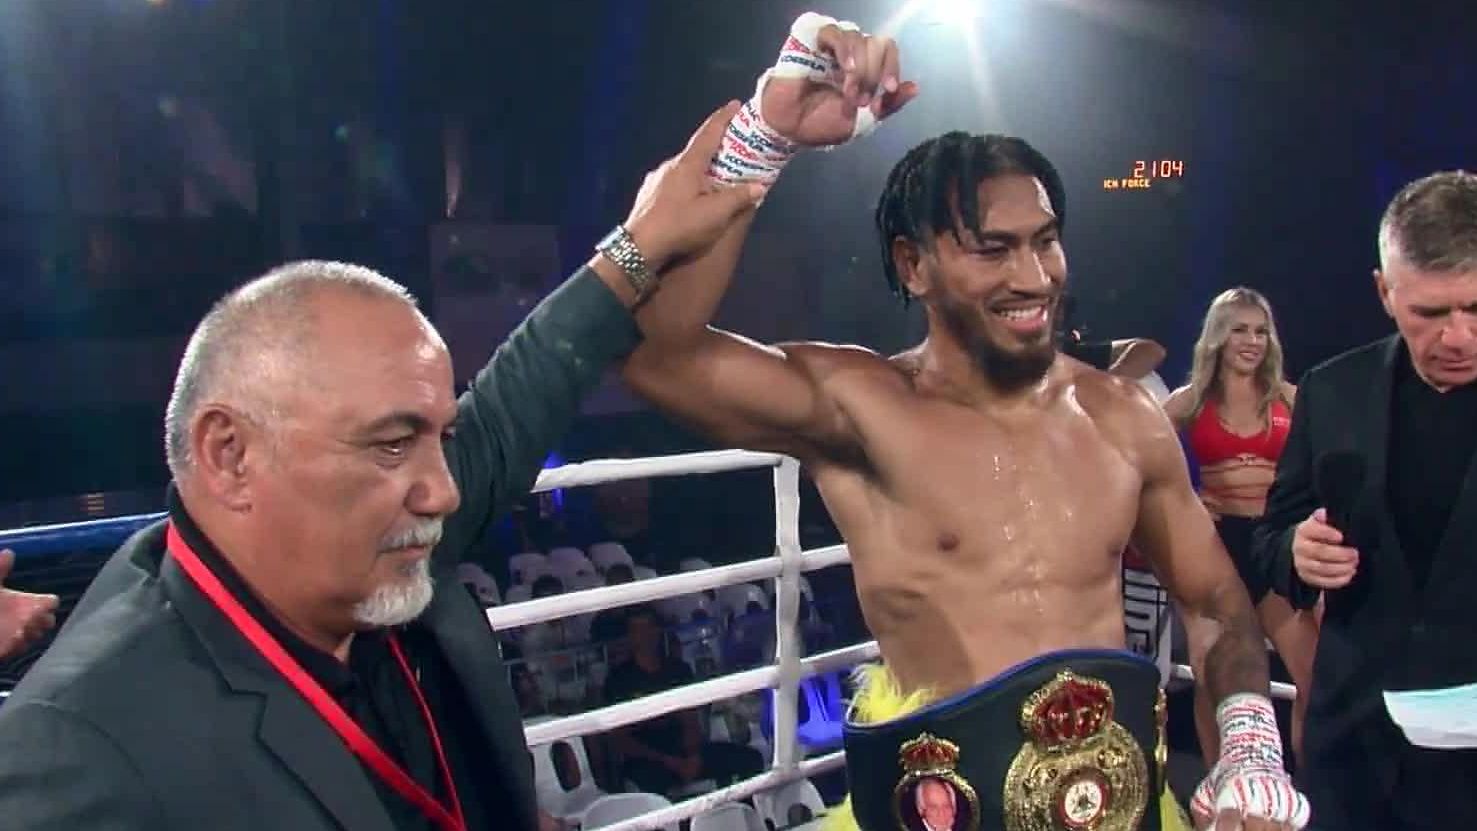 Paulo Aokuso after defeating Emmanuel Danso.